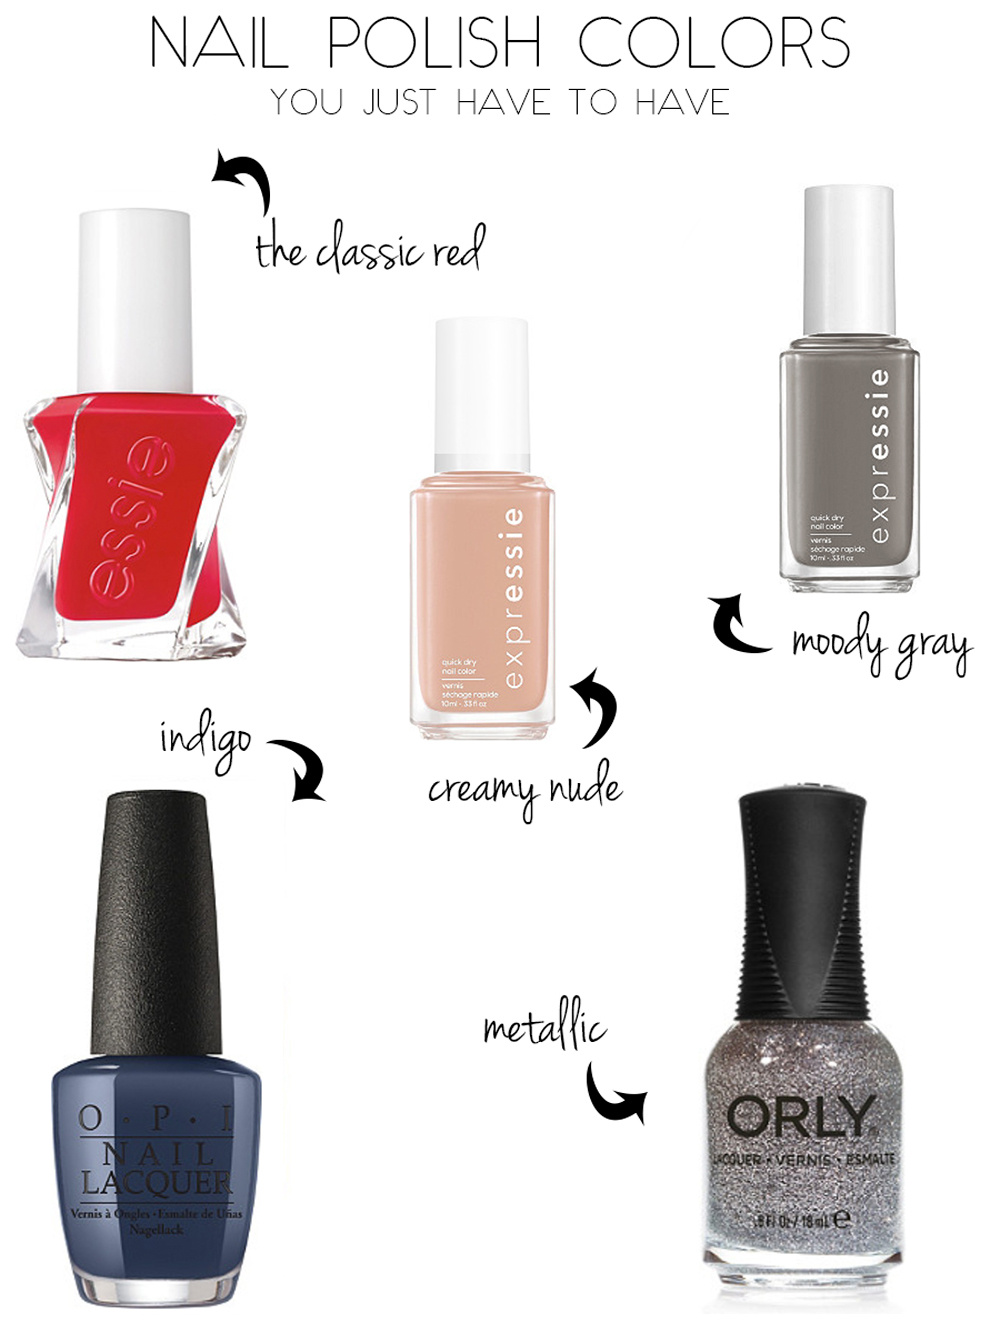 Nail Polish Colors You Just Have To Have - Tea Cups & Tulips